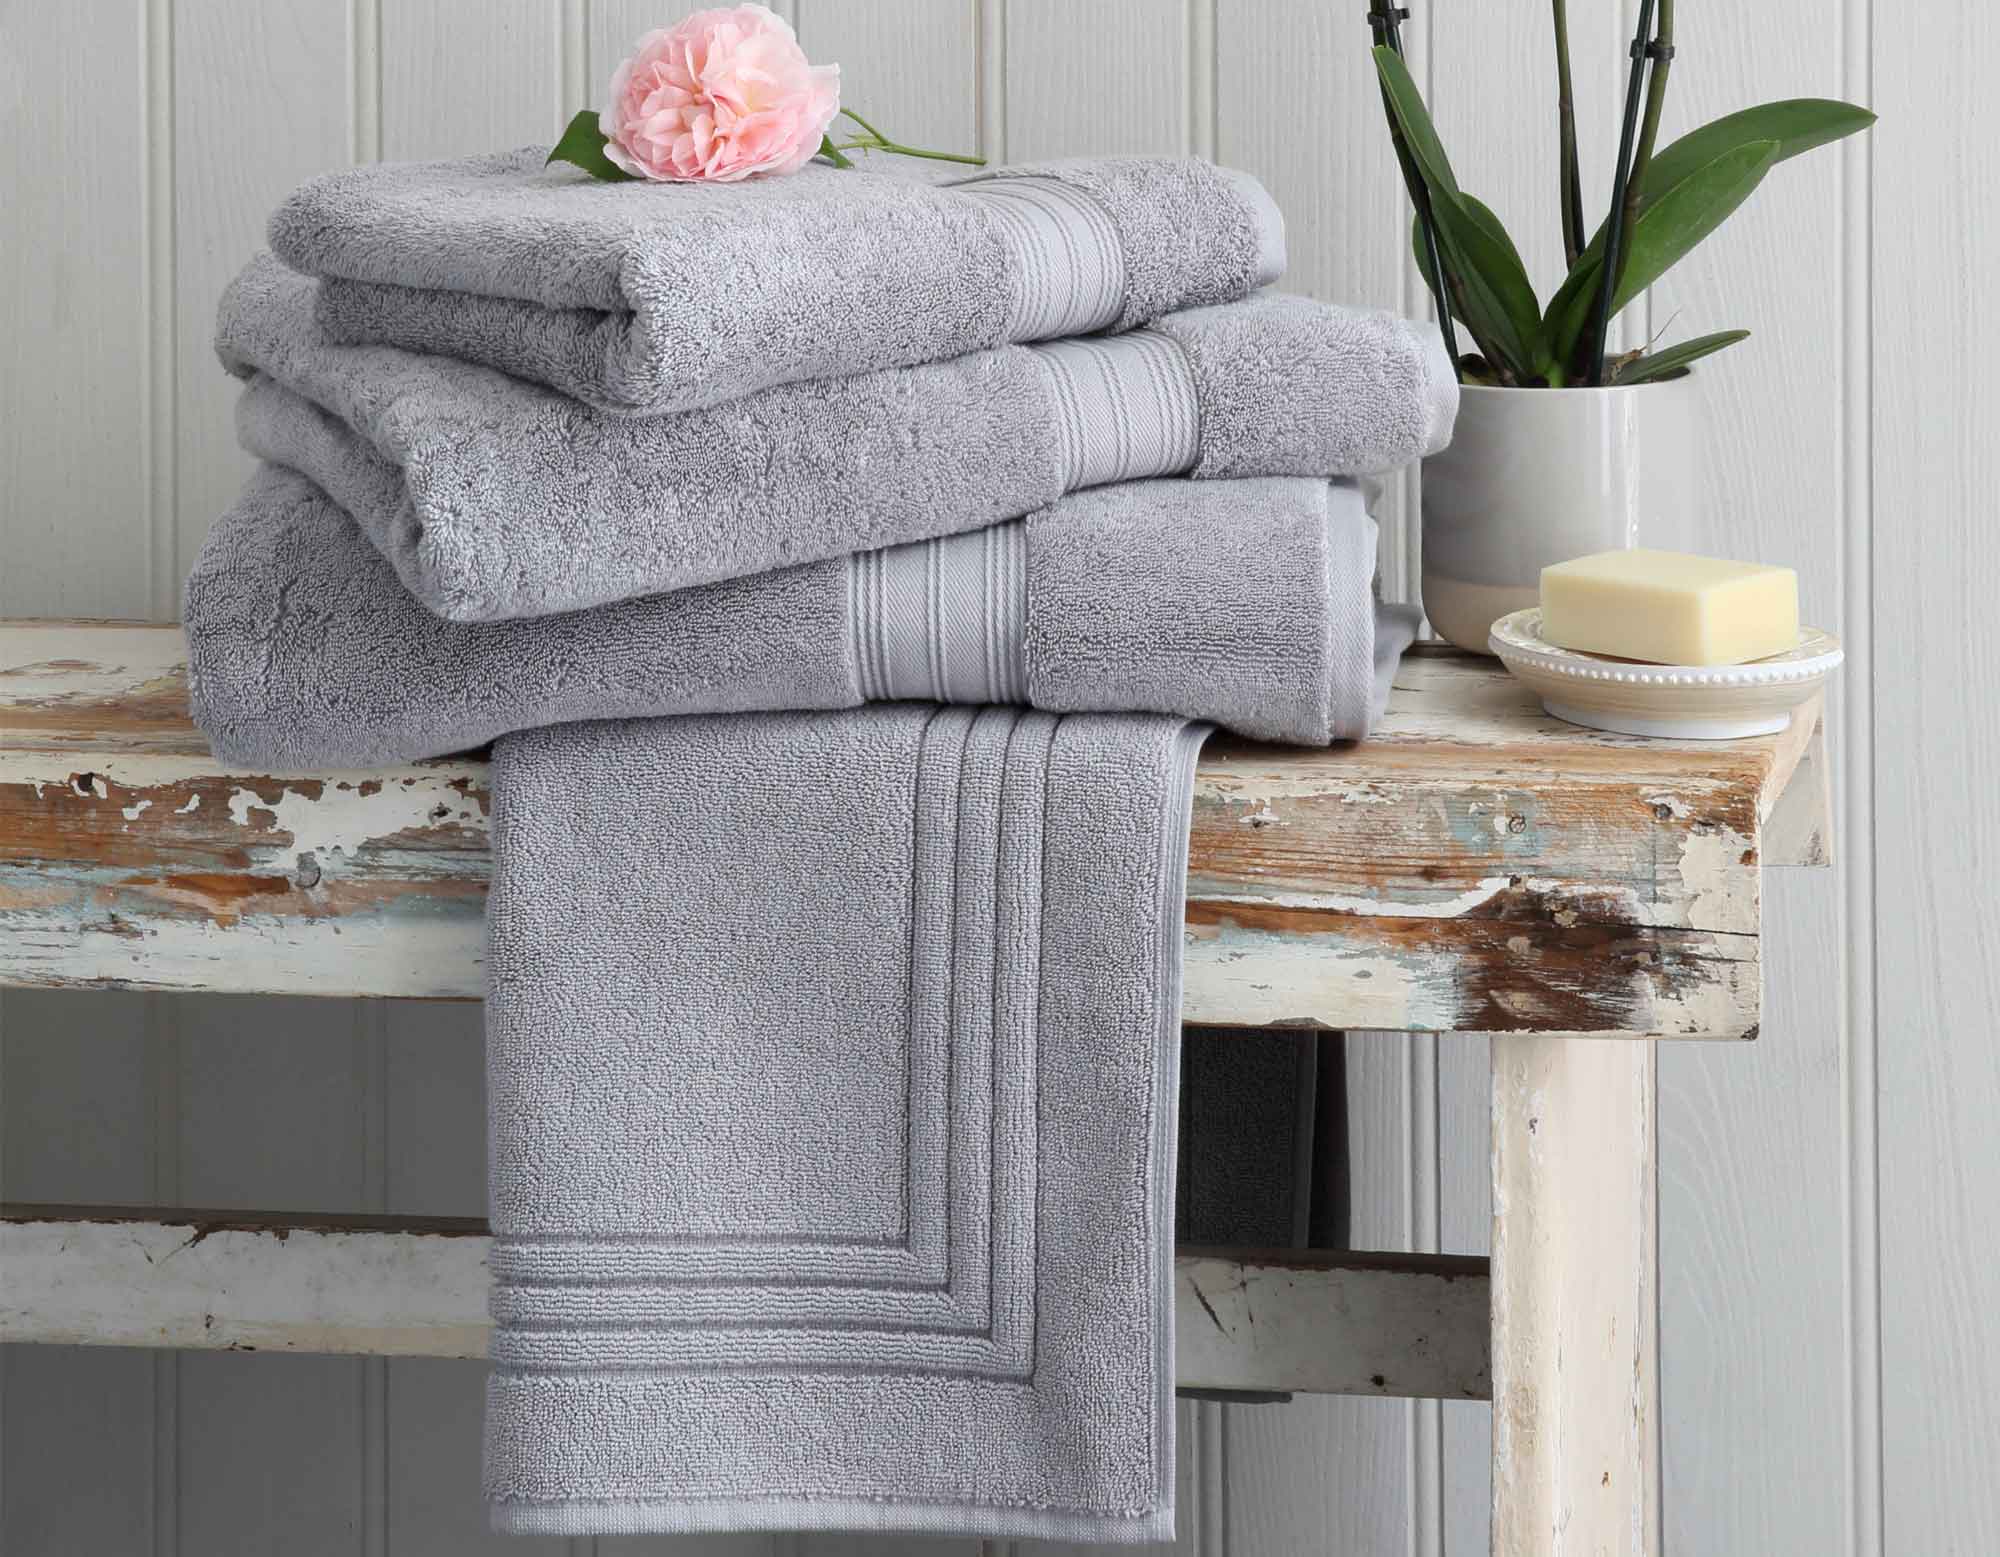 Wrap Yourself in Luxury with the Best Bath Towels and Bath Mats